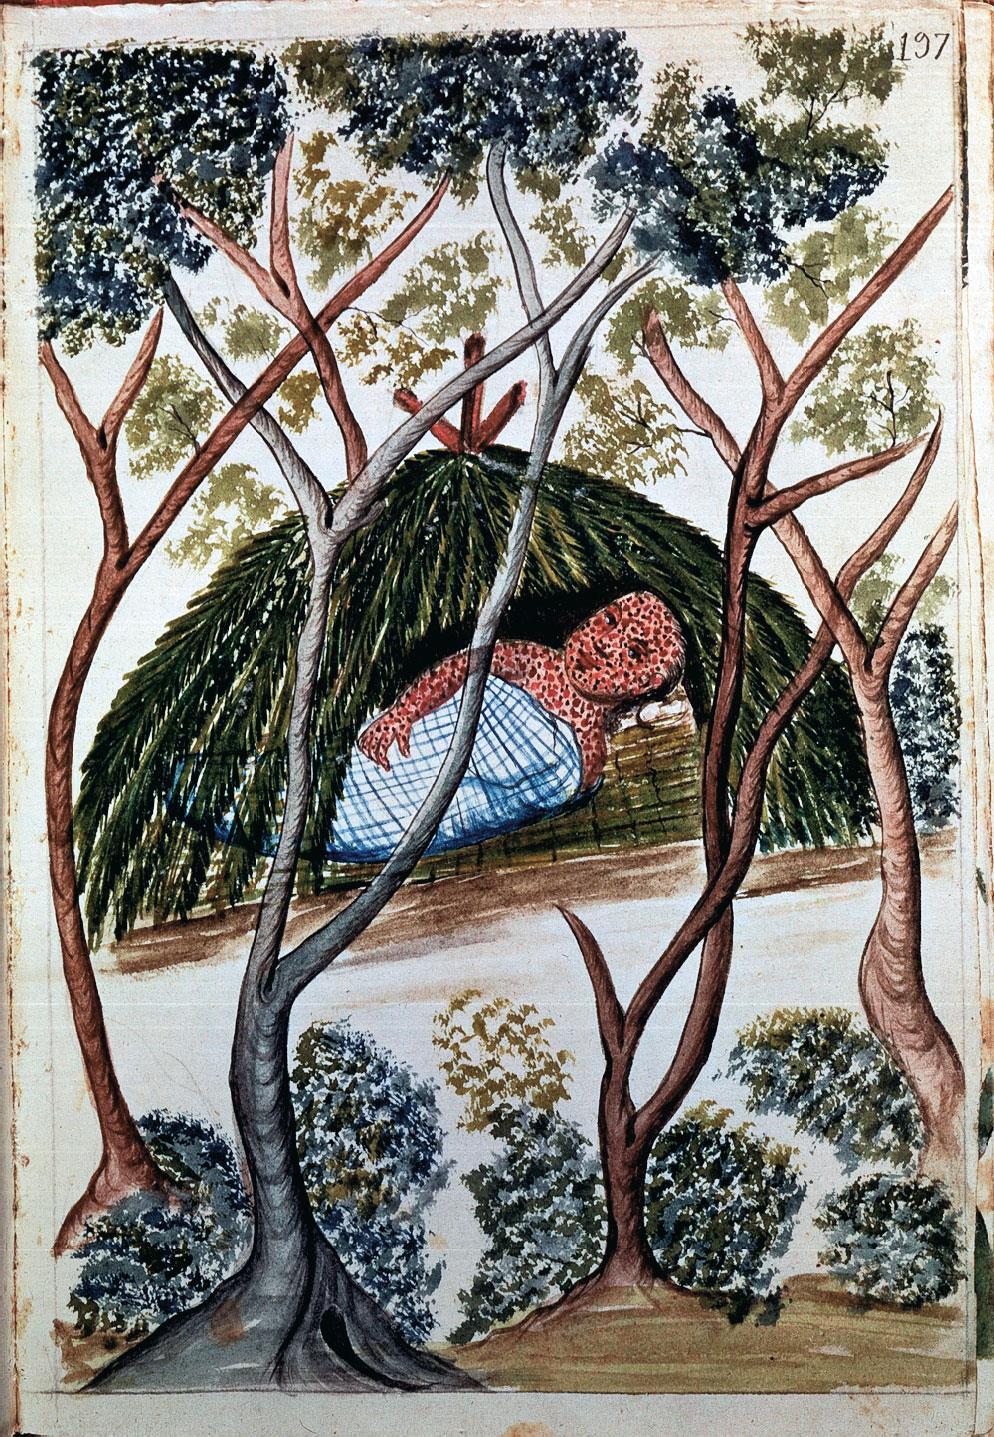 The Scourge of Smallpox This Peruvian infant, depicted about 1700, was